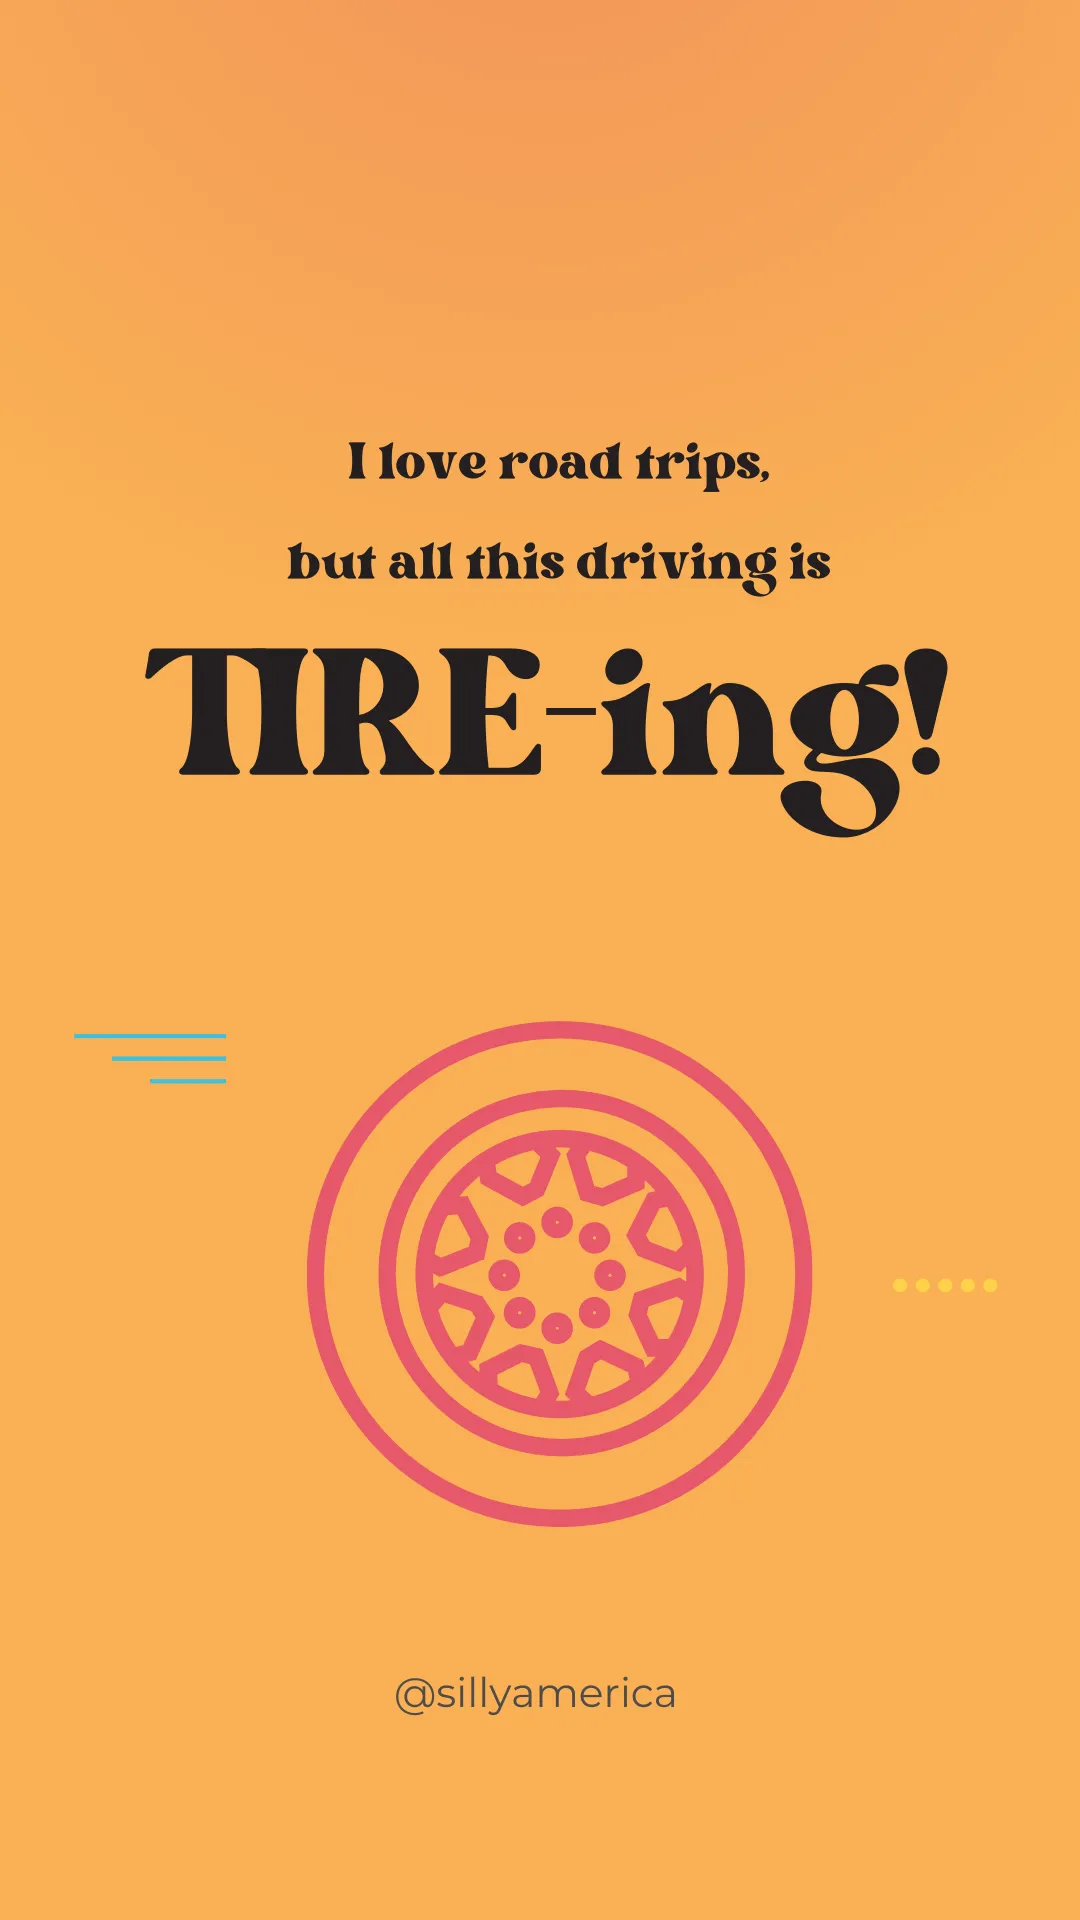 I love road trips, but all this driving is TIRE-ing! - Road Trip Puns